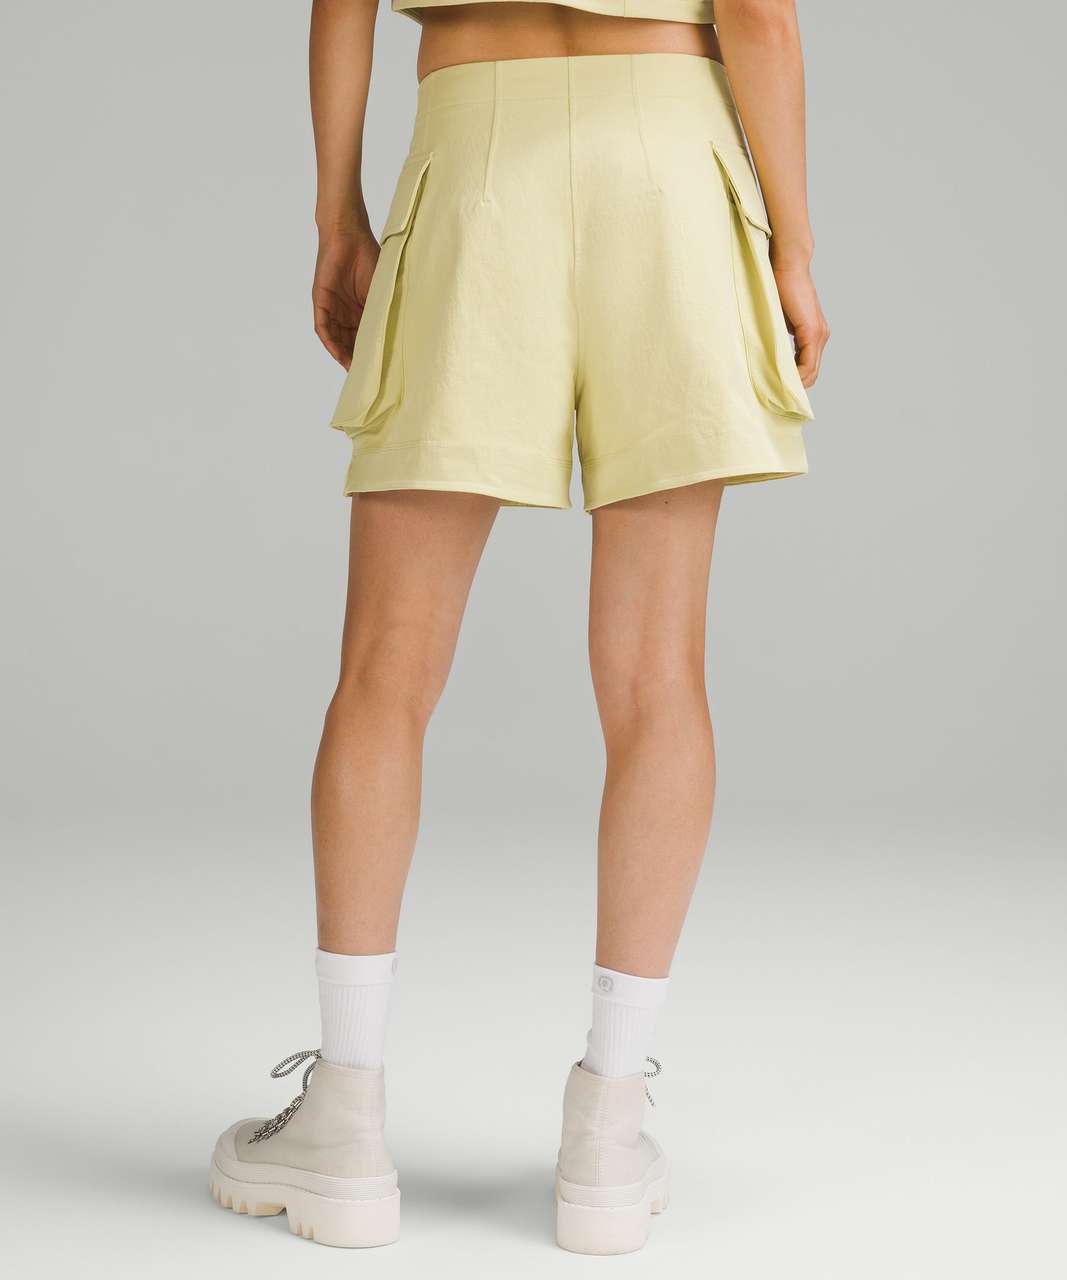 Lululemon Relaxed-Fit Super-High-Rise Cargo Short 4" - Finch Yellow